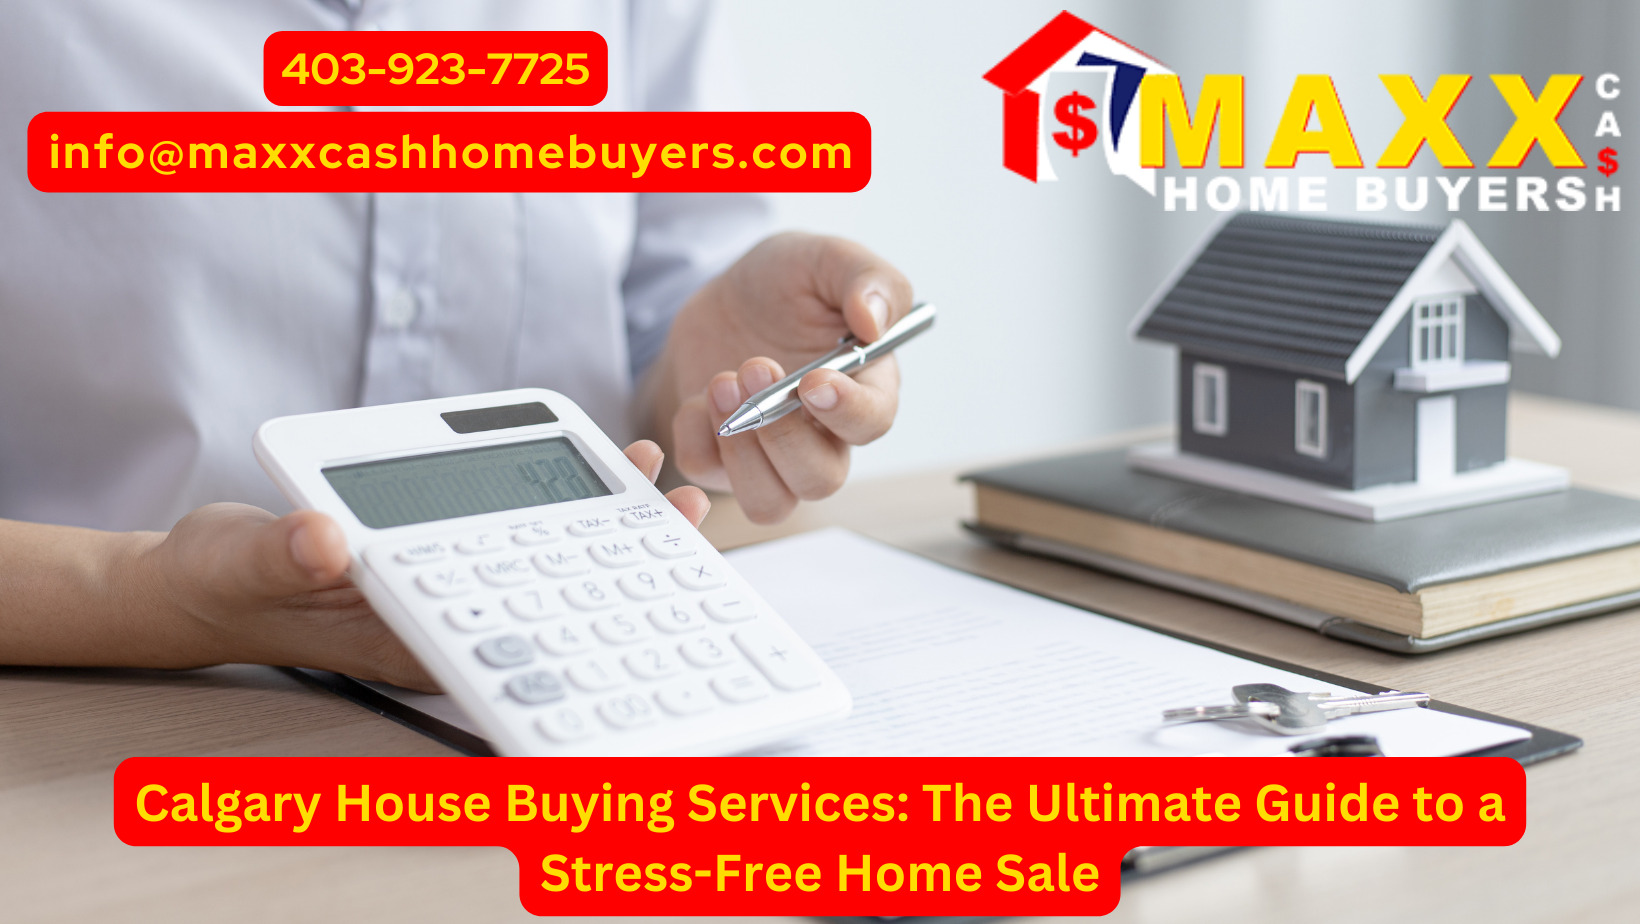 Calgary House Buying Services The Ultimate Guide to a Stress-Free Home Sale